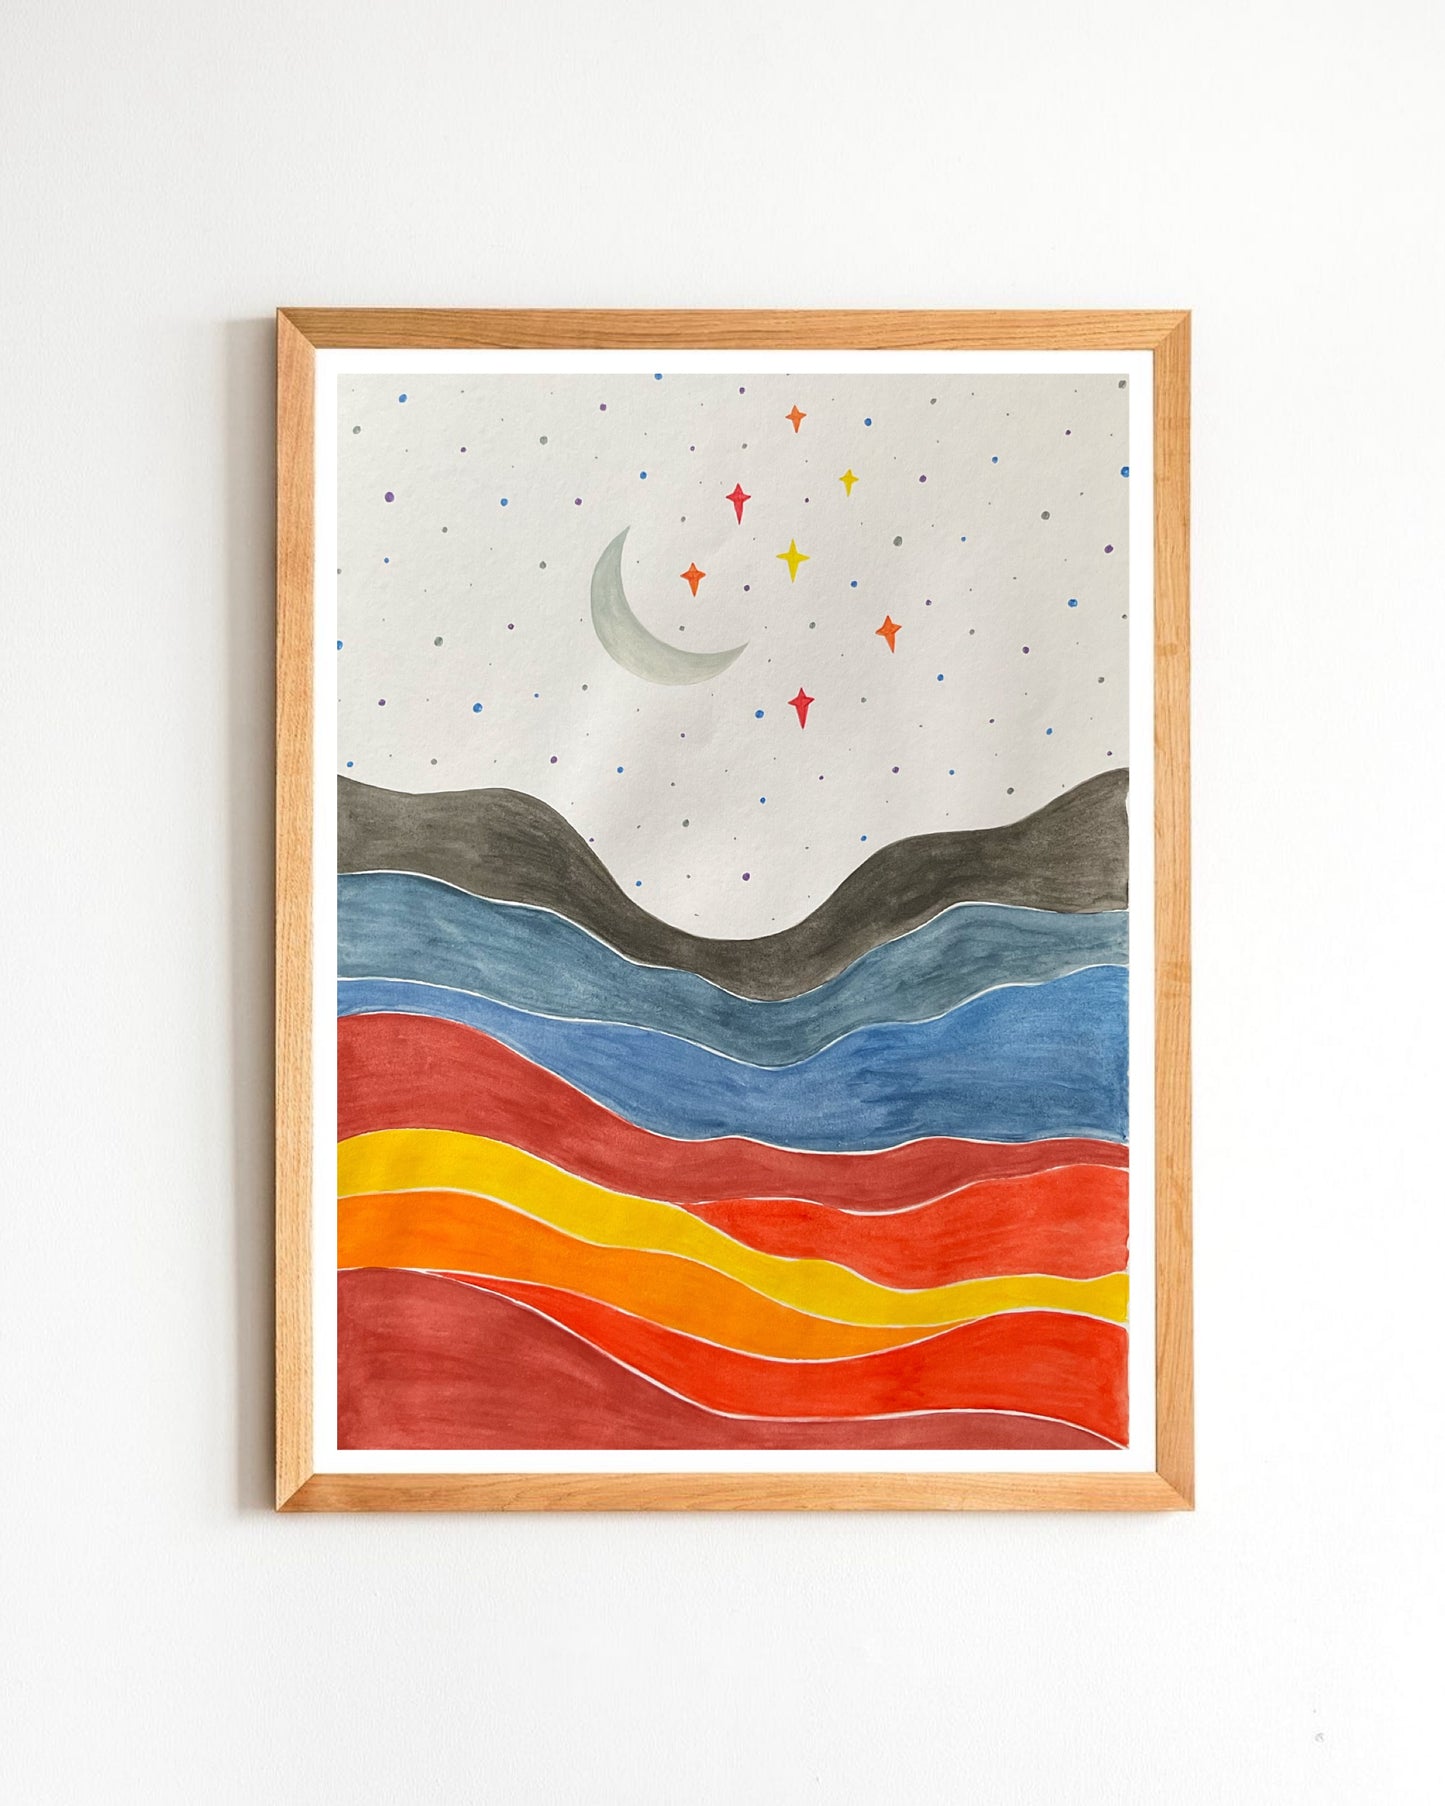 Dawn to Dusk: A Duo of Hand-Painted Wall Art